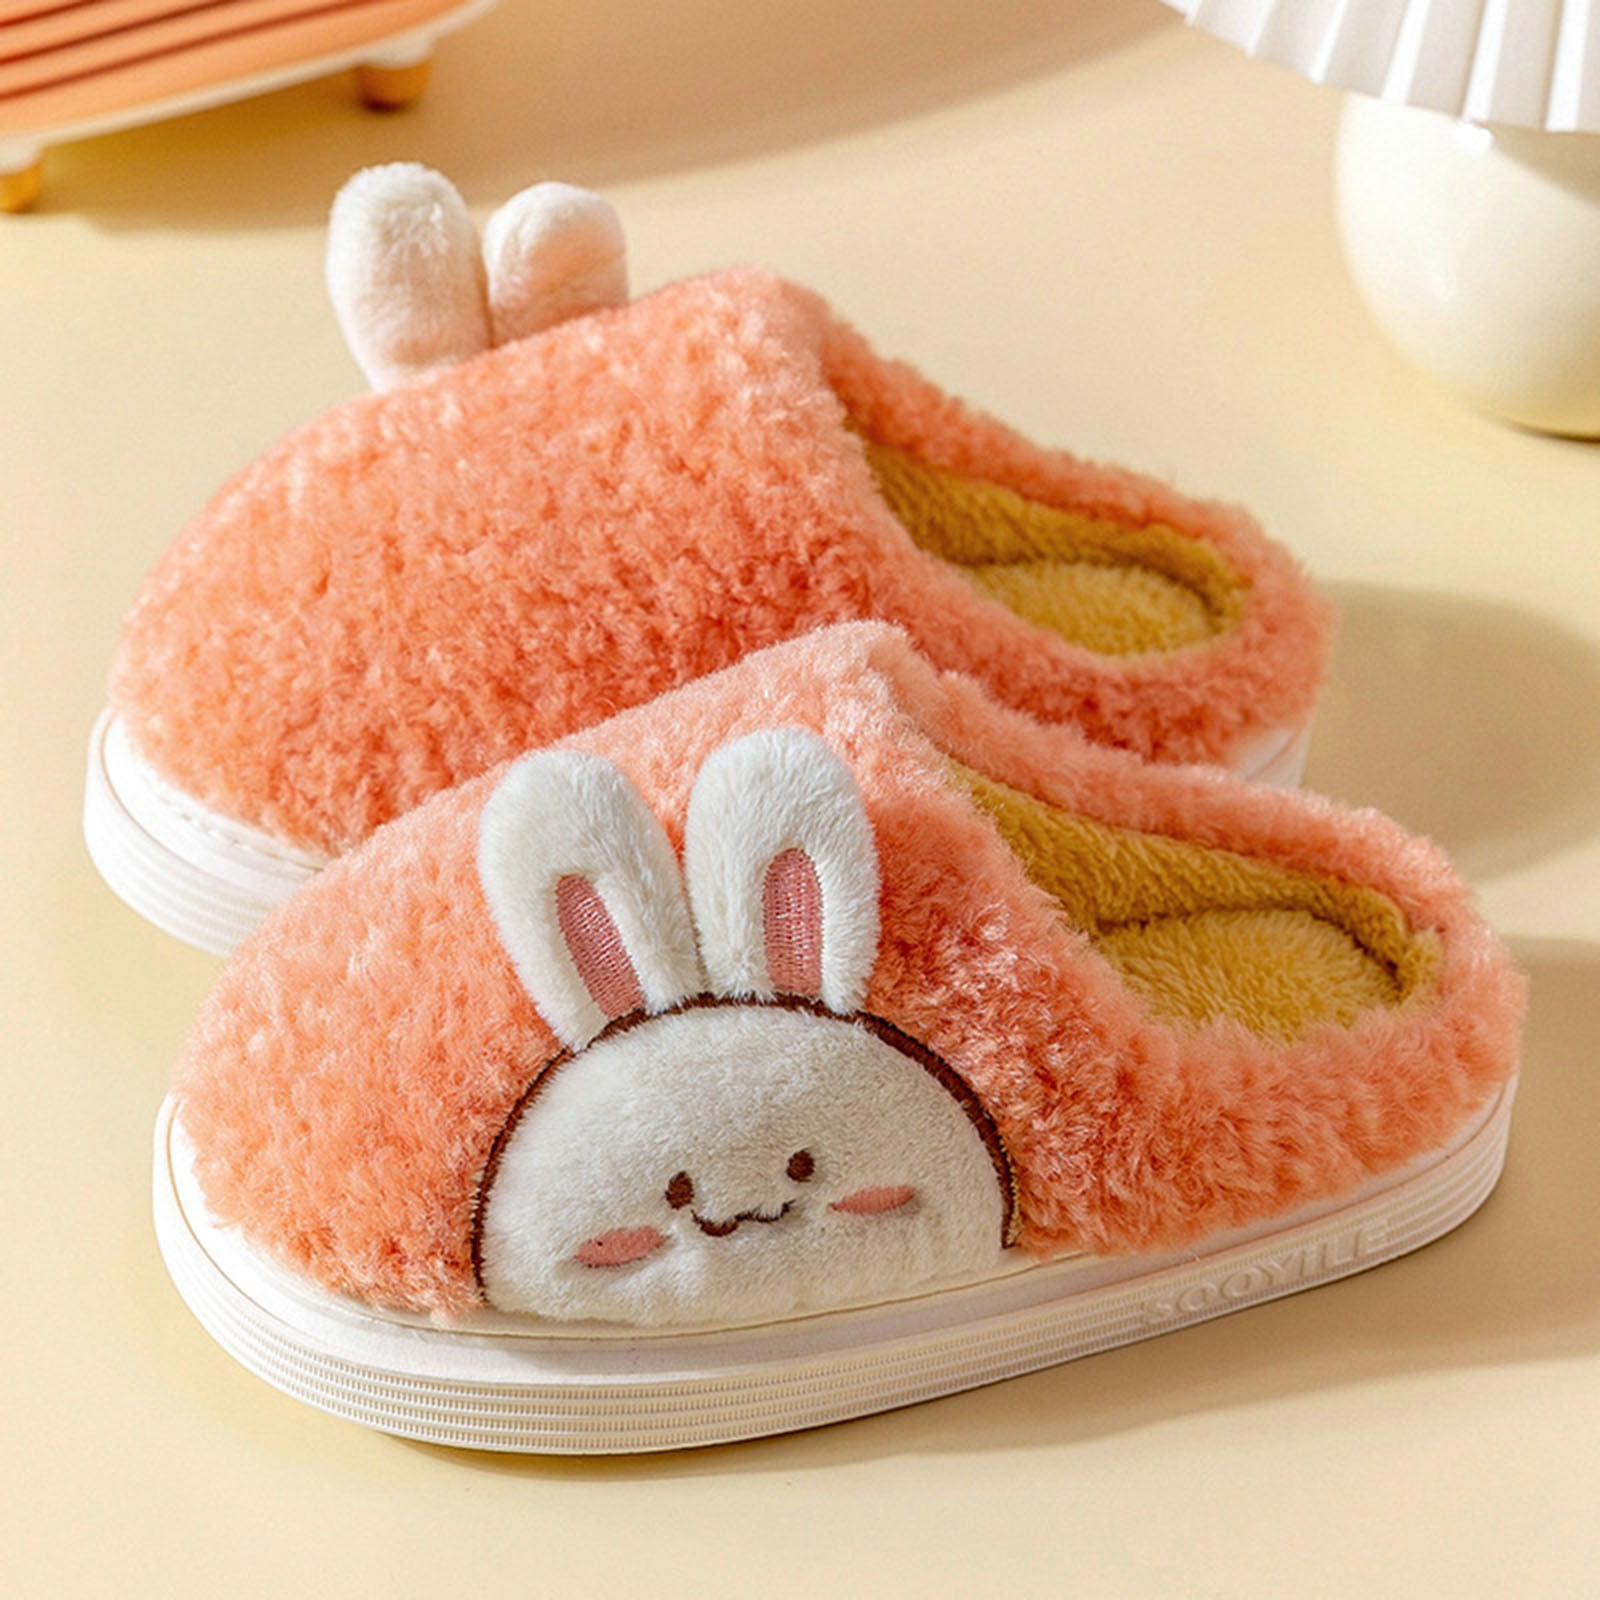 Cute Duck Slippers Women Shoes Winter Slippers Indoor House Shoes Warm  Plush Slipper Couples Home Platform Footwear